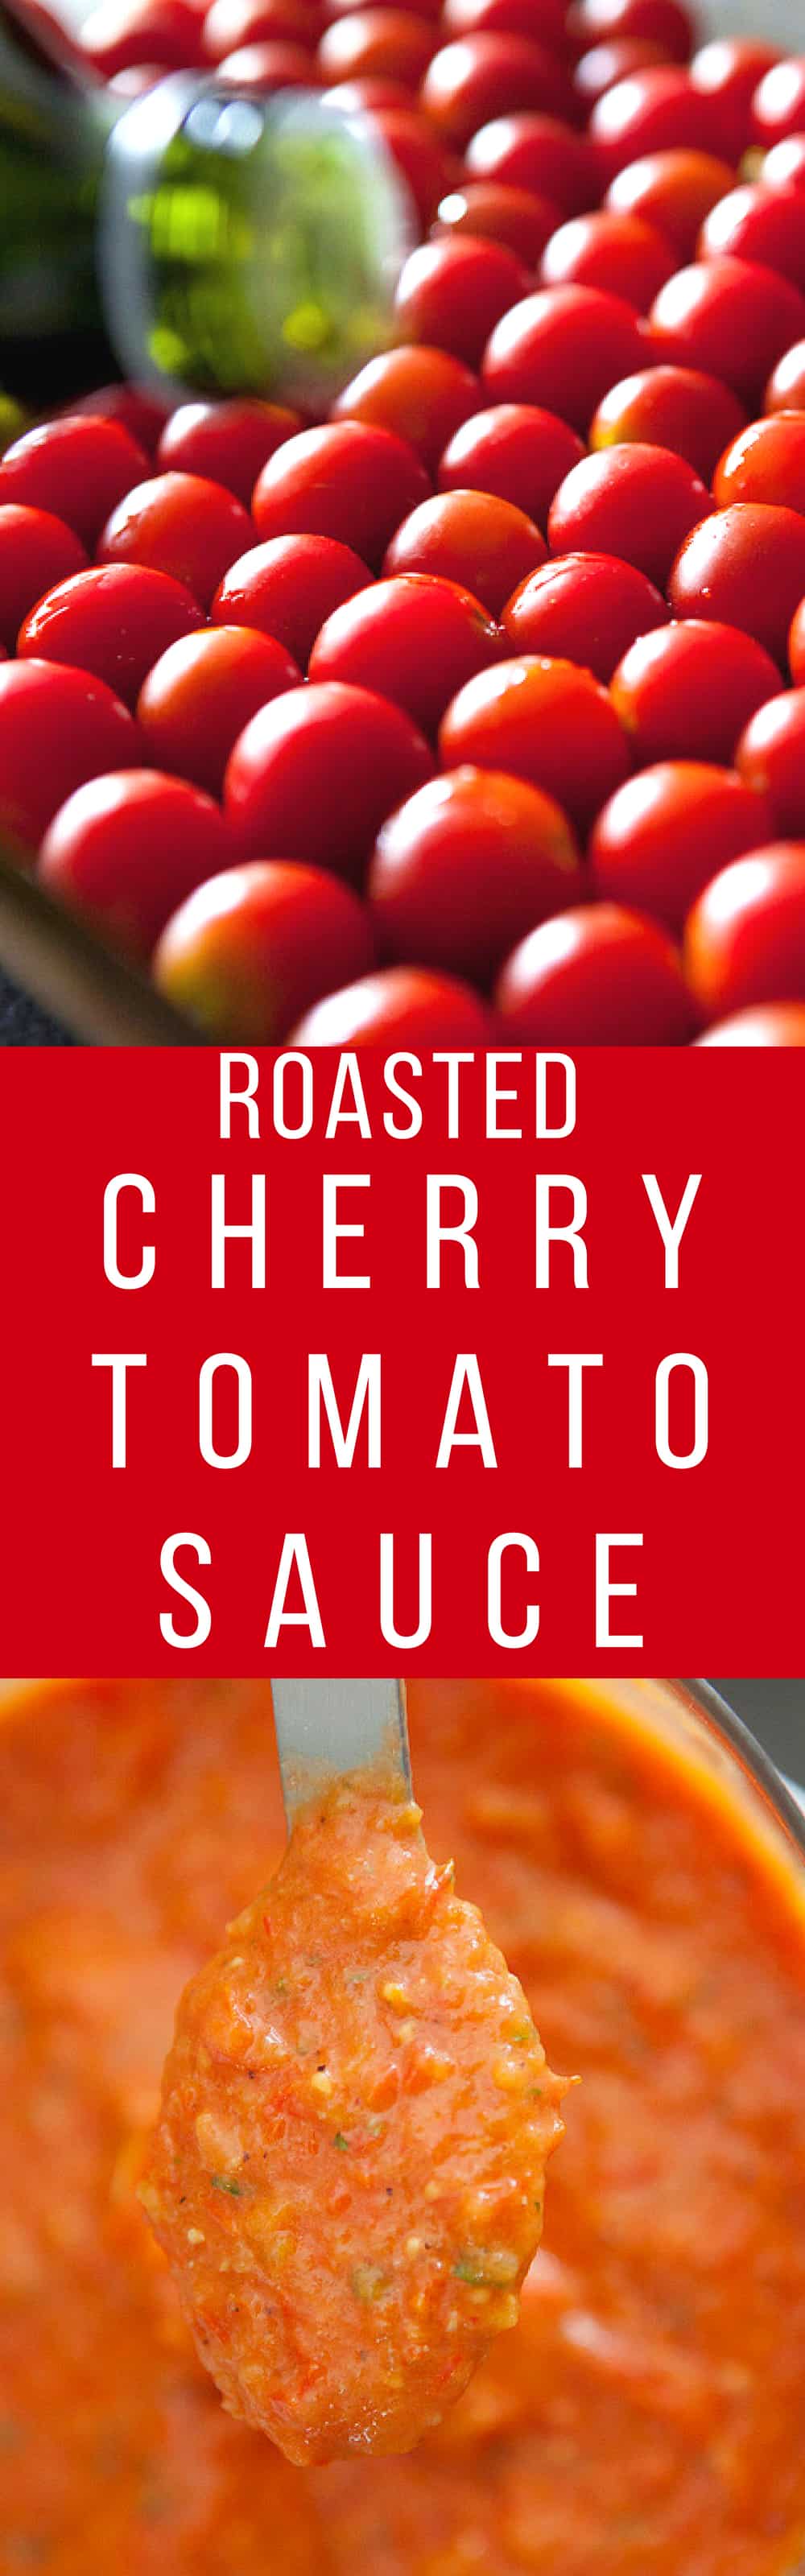 ROASTED Cherry Tomato Sauce is sweet, creamy and SO EASY to make! This is the best recipe for growing garden tomatoes! You can serve immediately on pasta, can it or freeze it! Find out why thousands of people love this sauce!